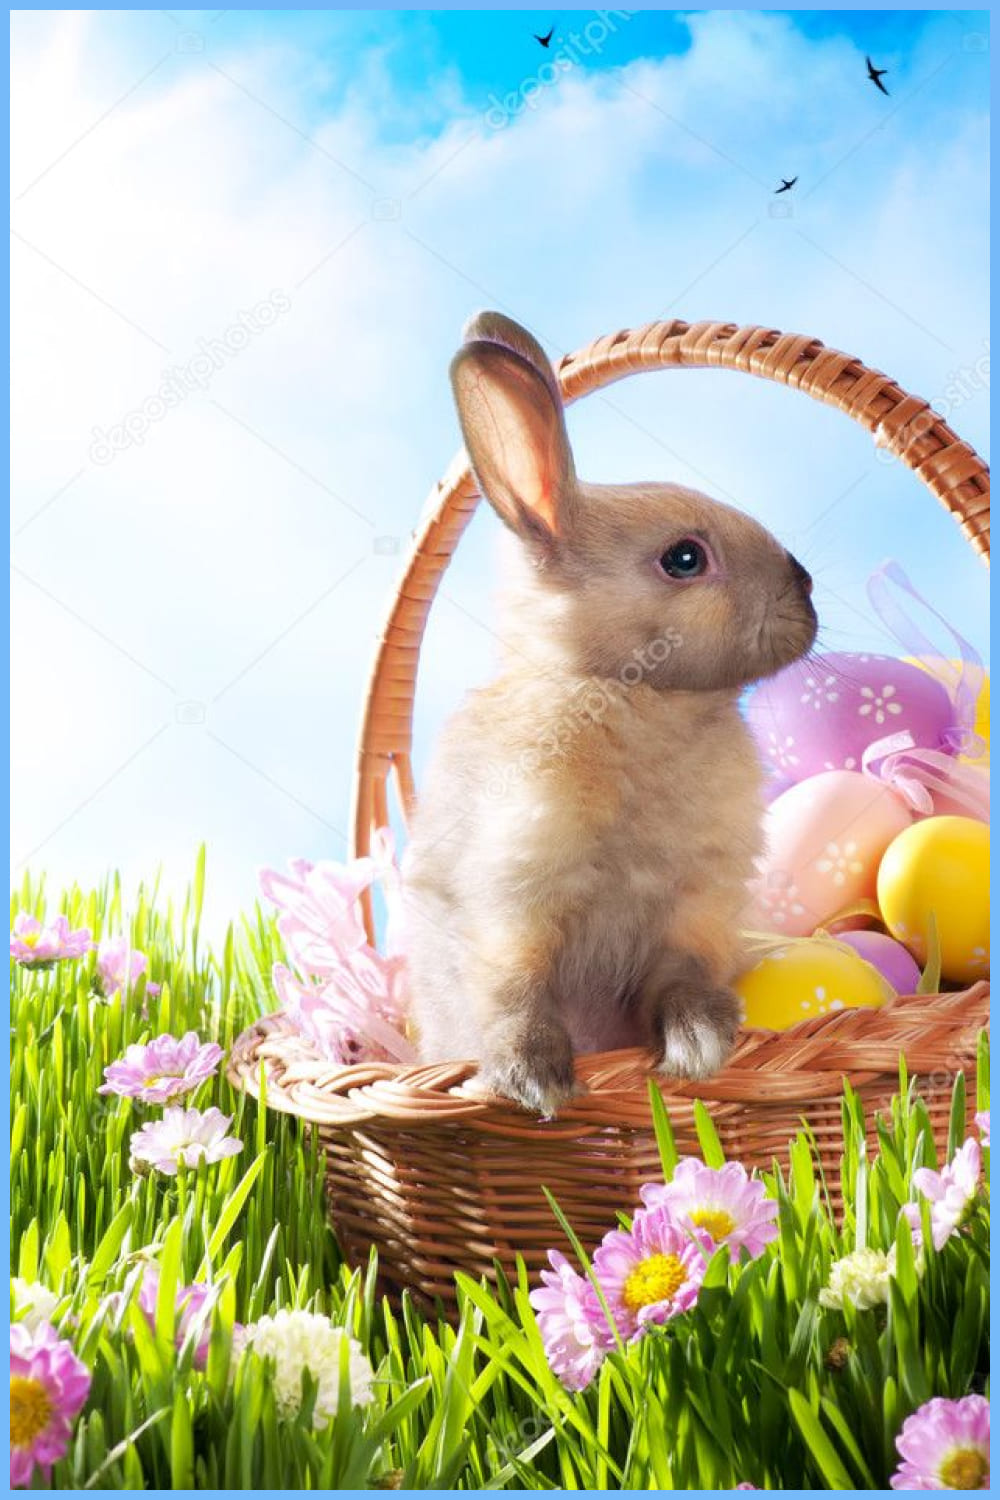 Easter basket with decorated eggs and the Easter bunny on the grass.